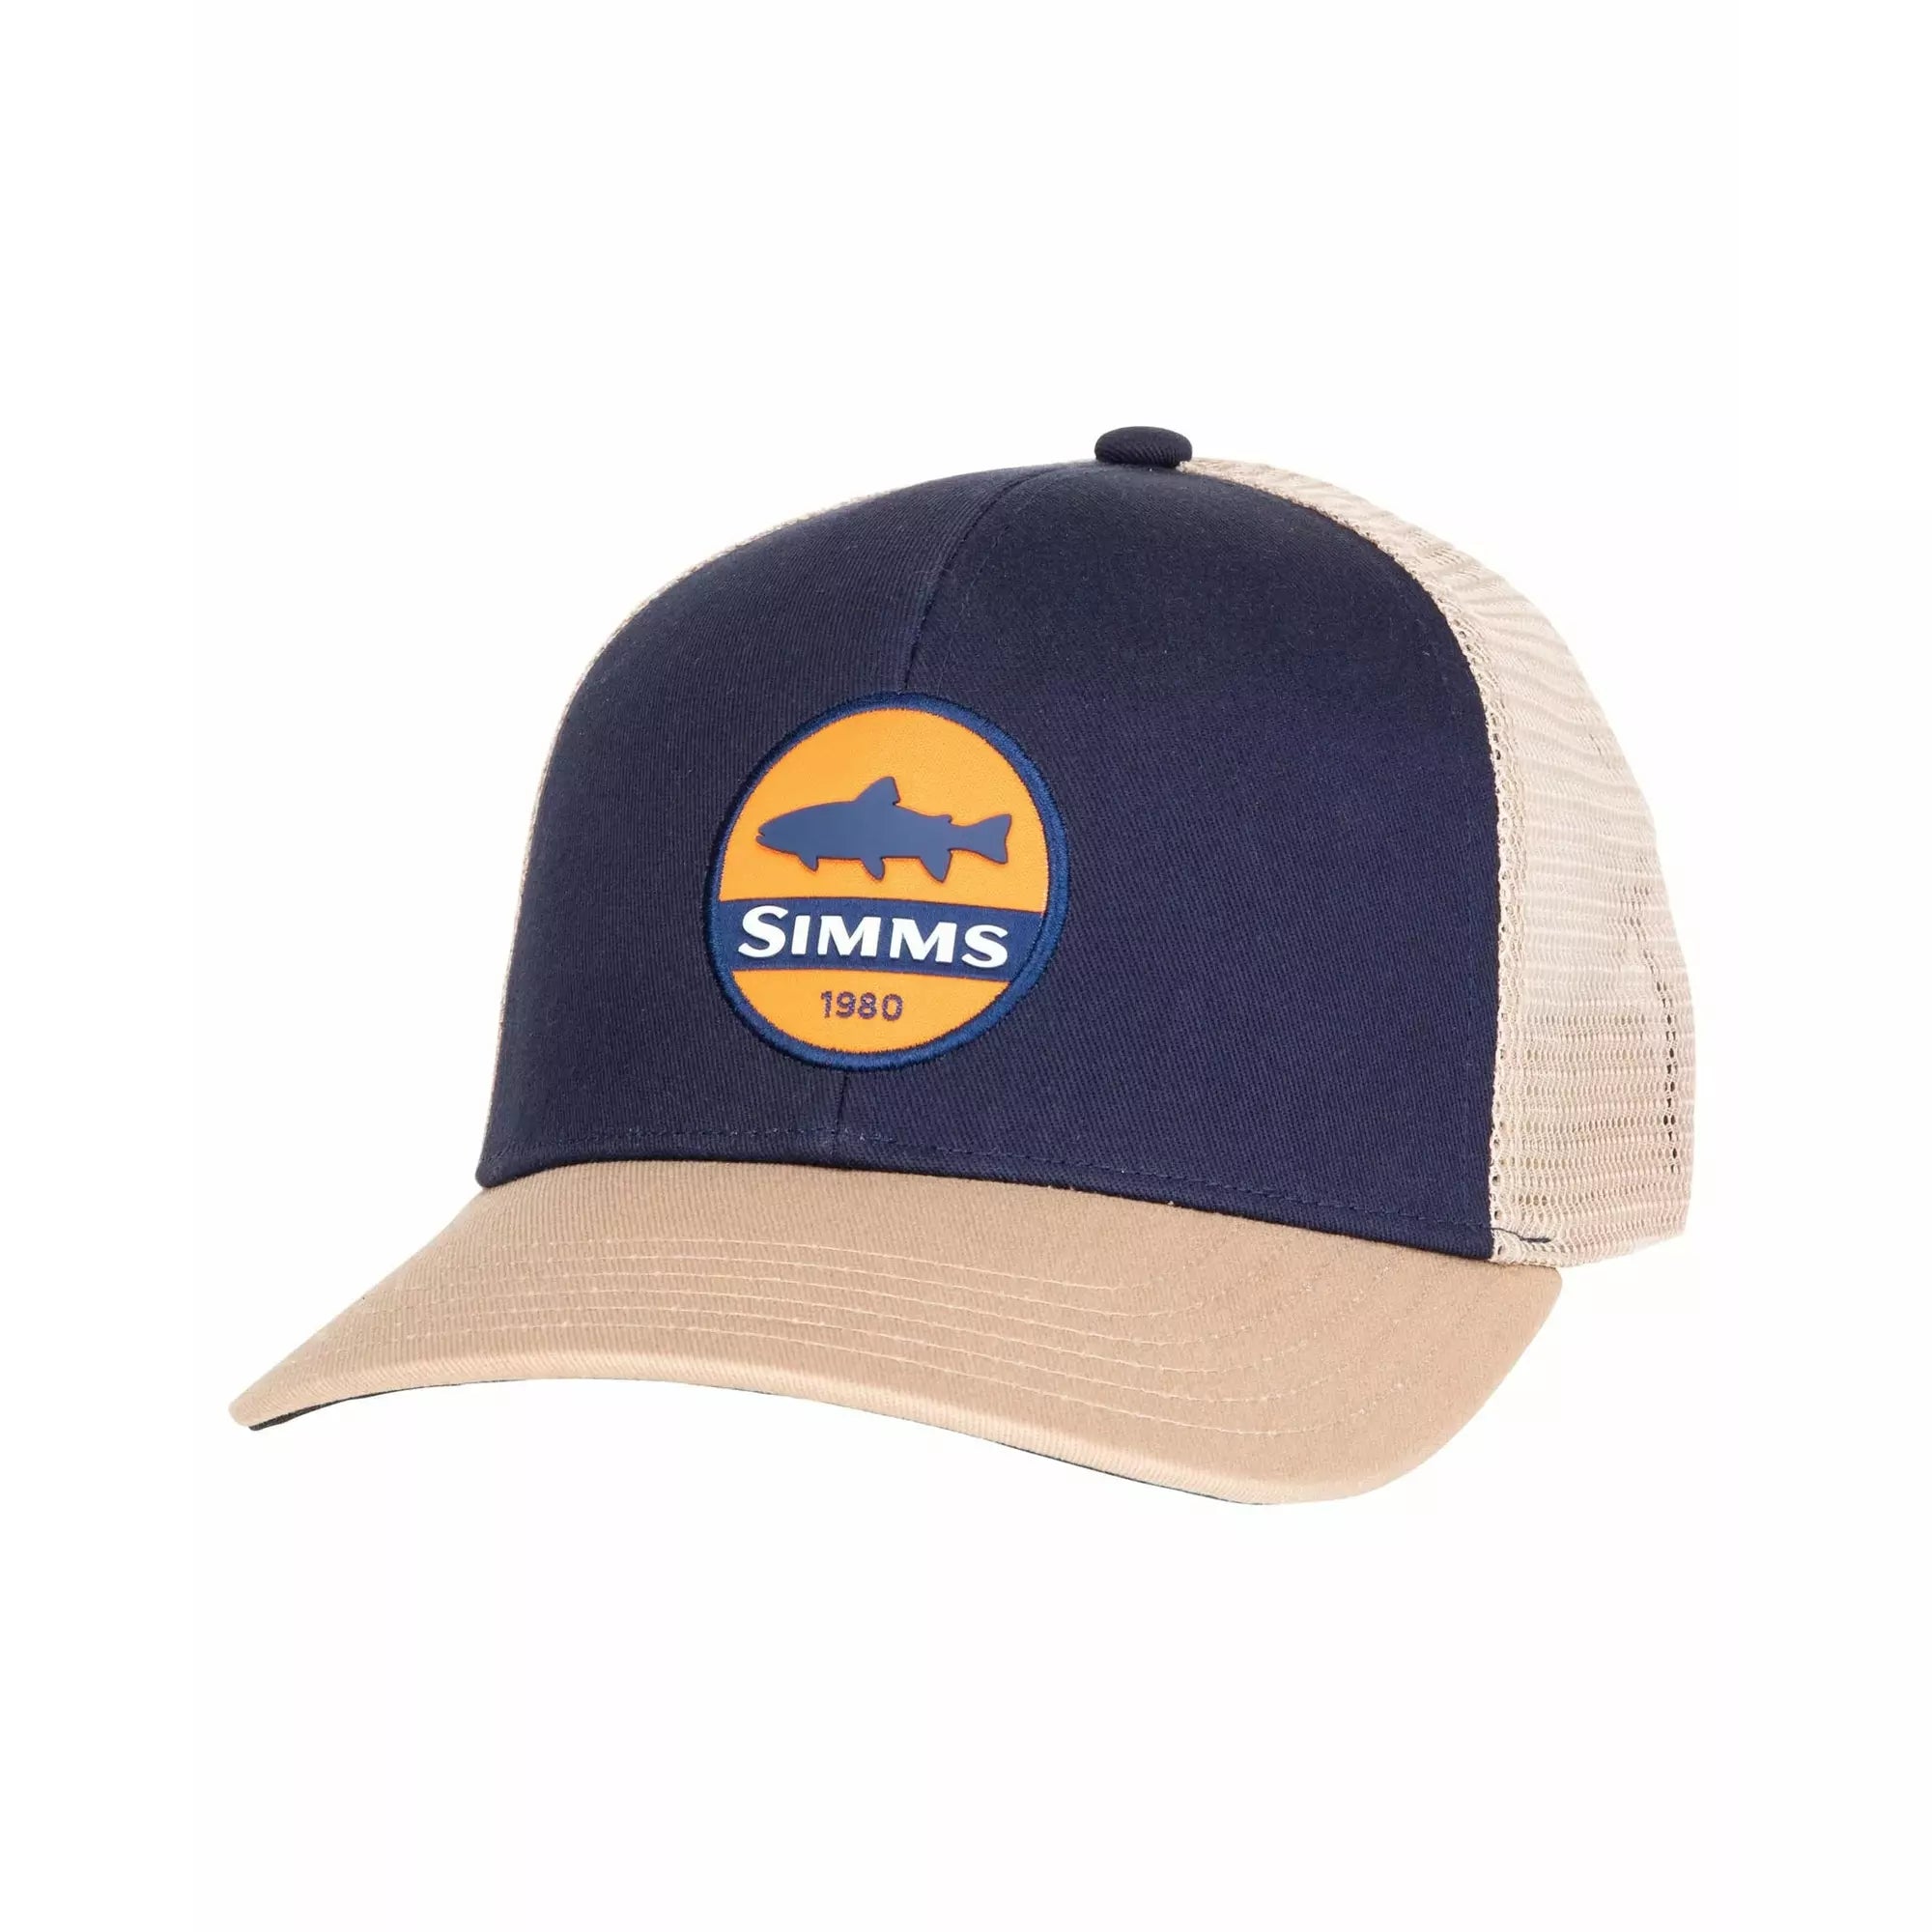 Simms Trout Patch Trucker Hat - Navy